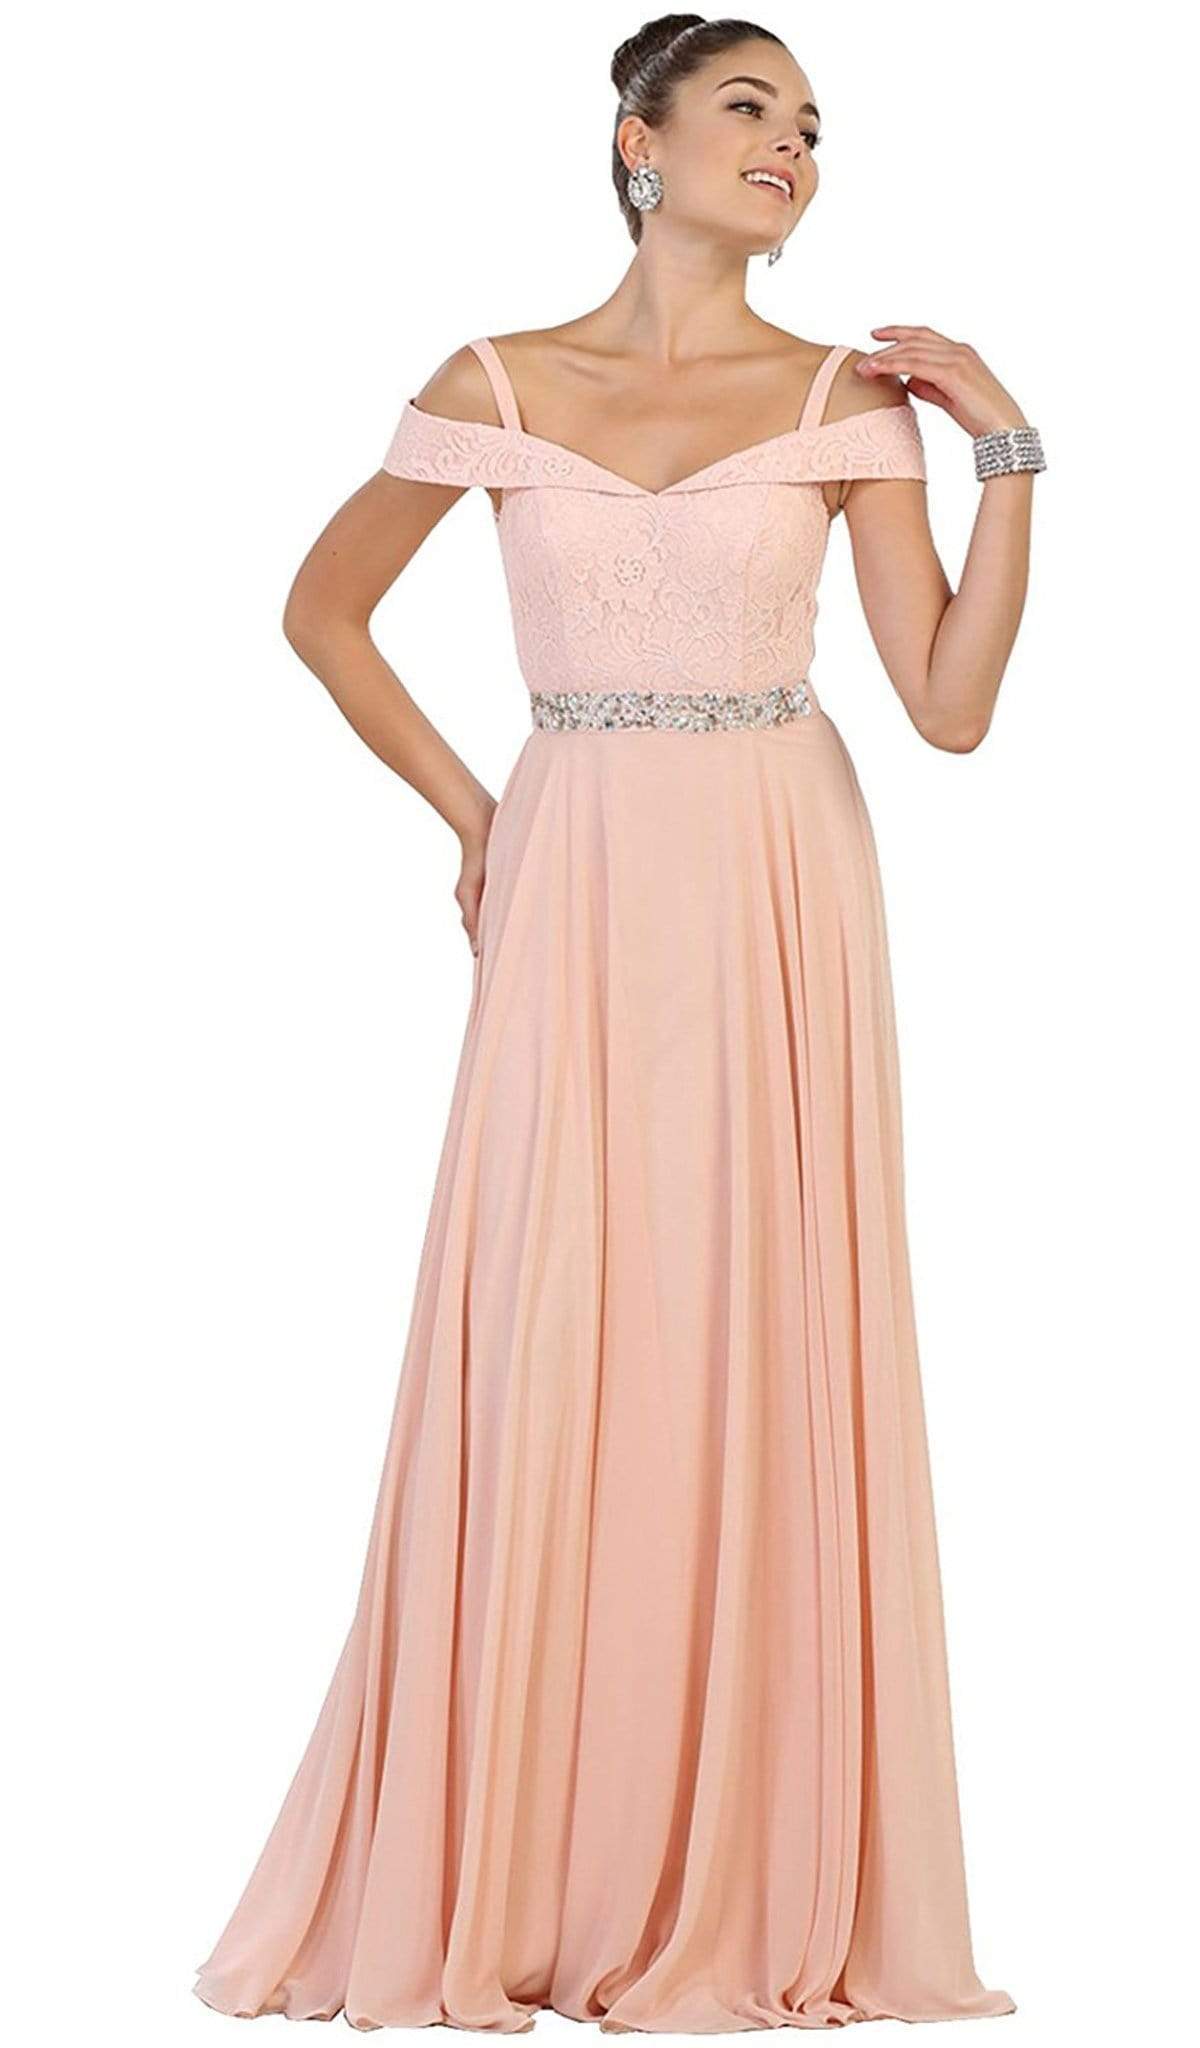 May Queen - MQ1540 Cold Shoulder Lace Prom Dress Bridesmaid Dresses 4 / Blush